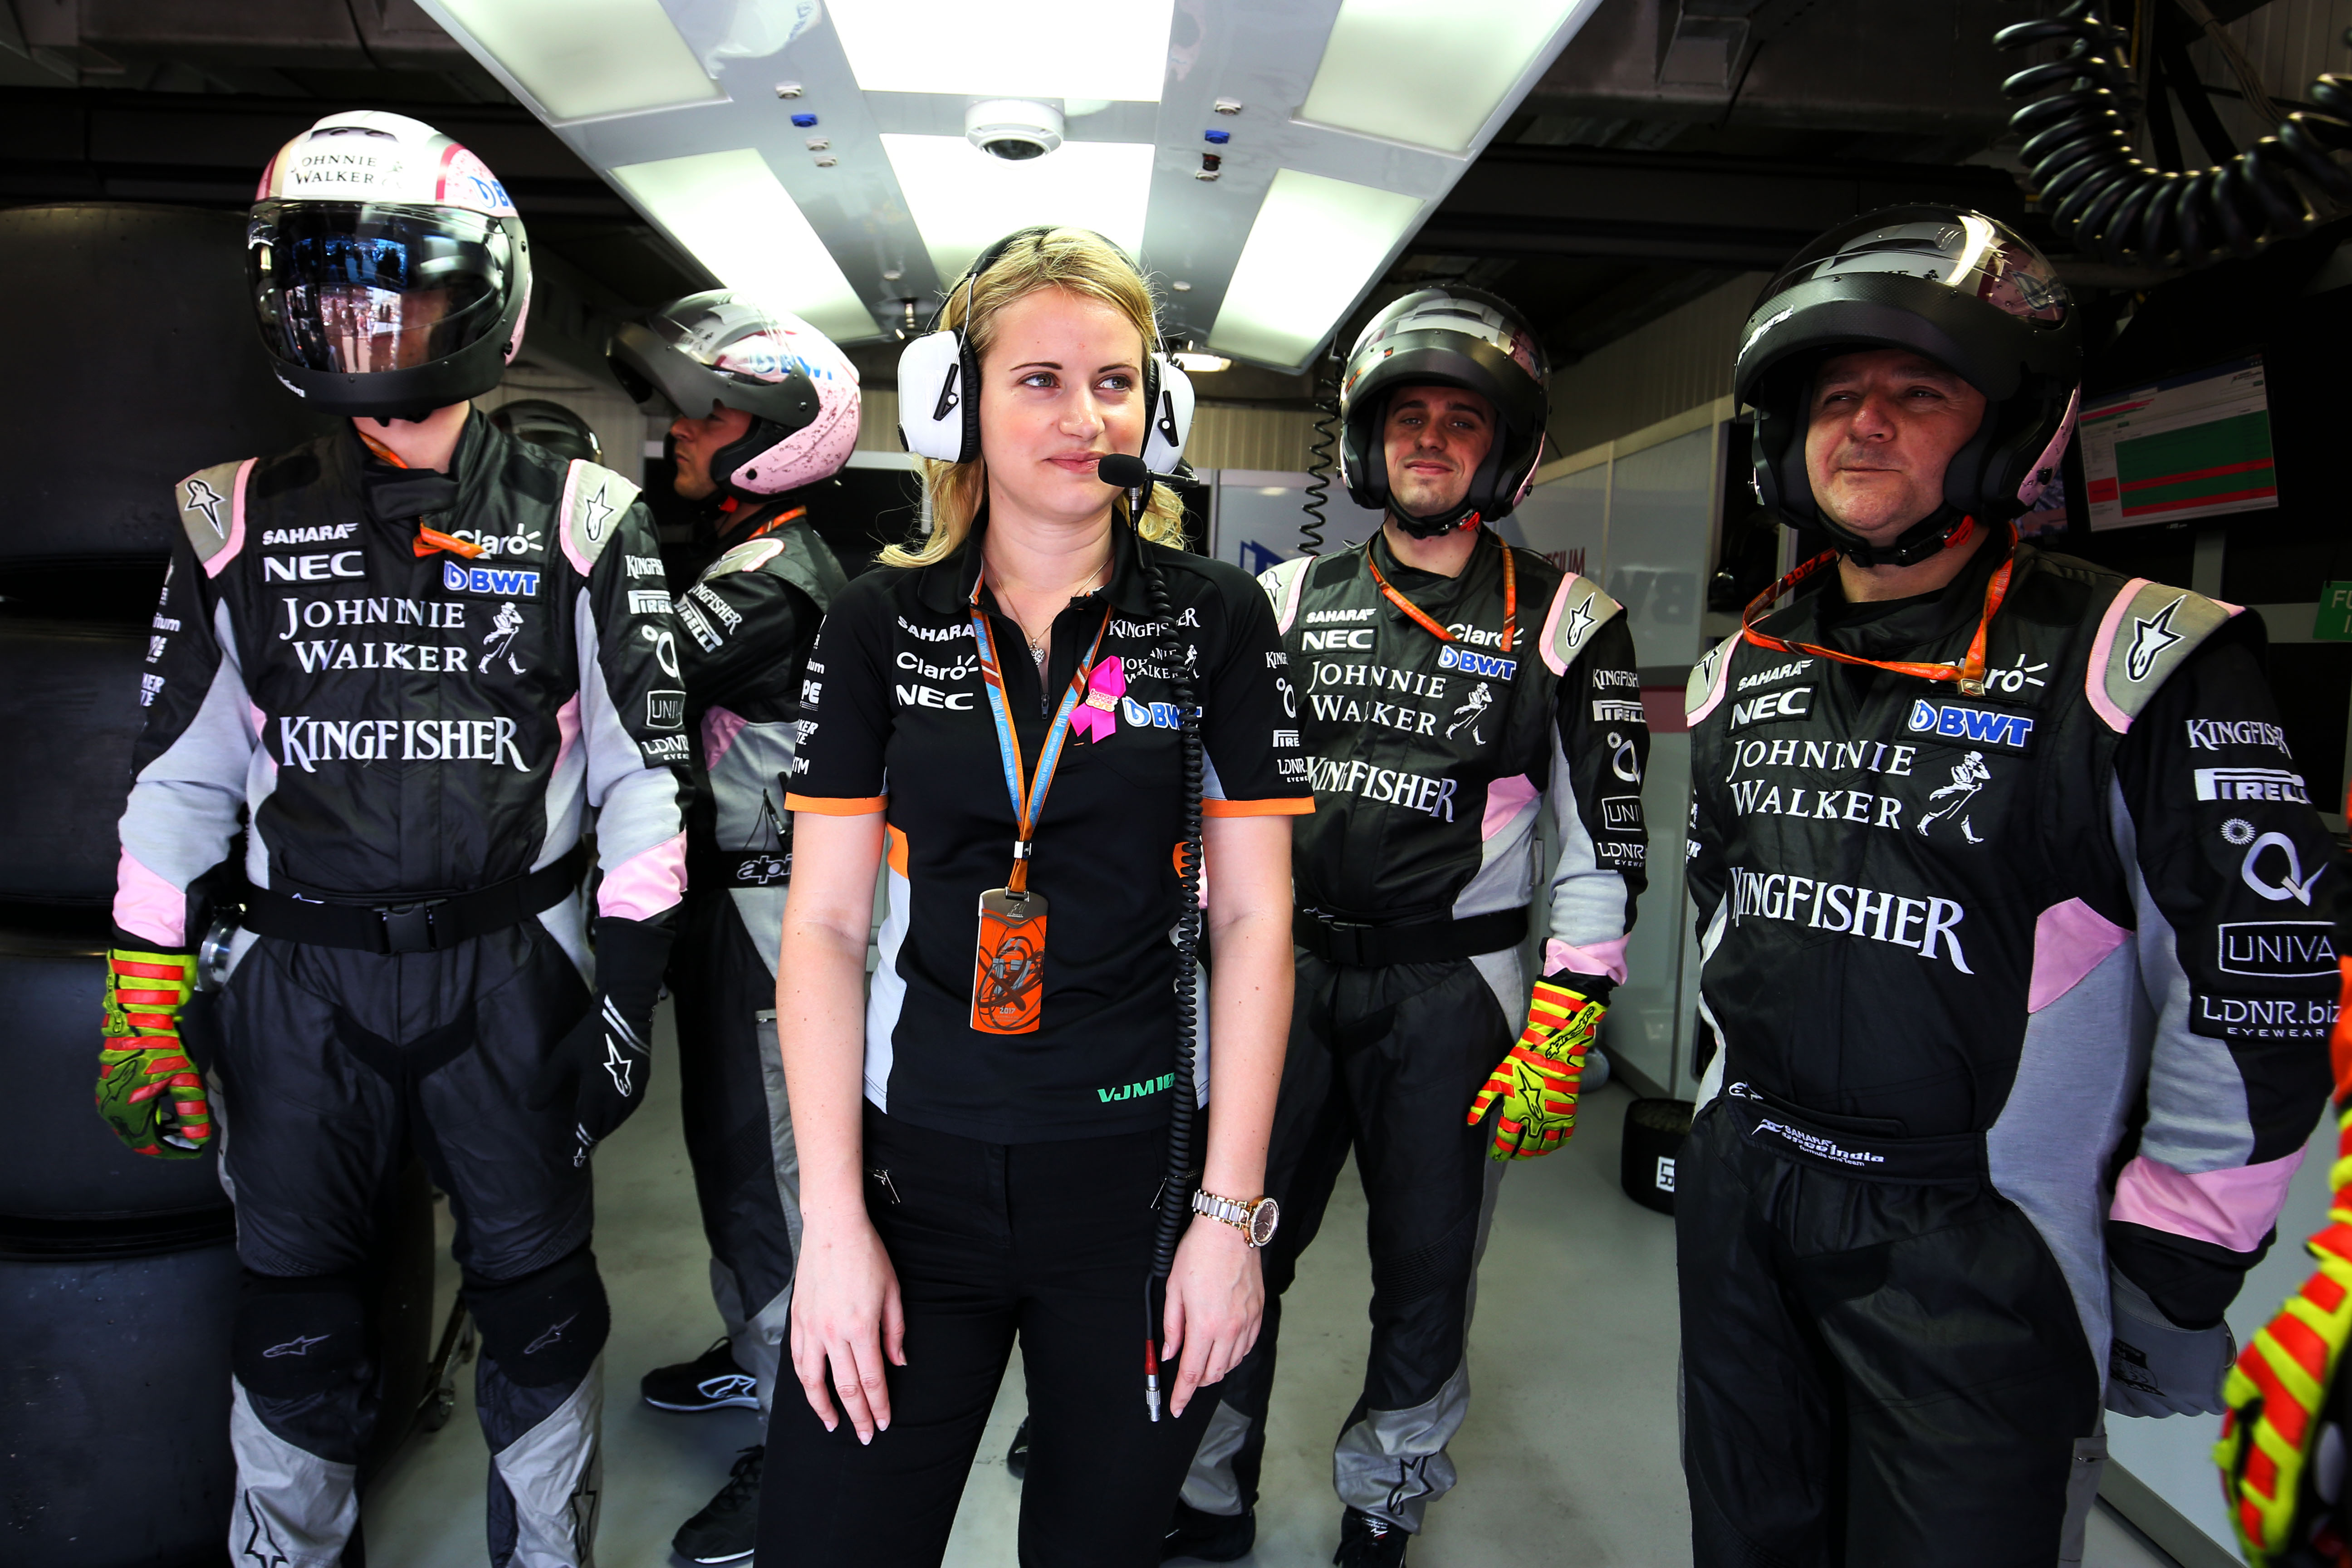 Meet the inspirational women proving that F1 is ‘more than a man’s